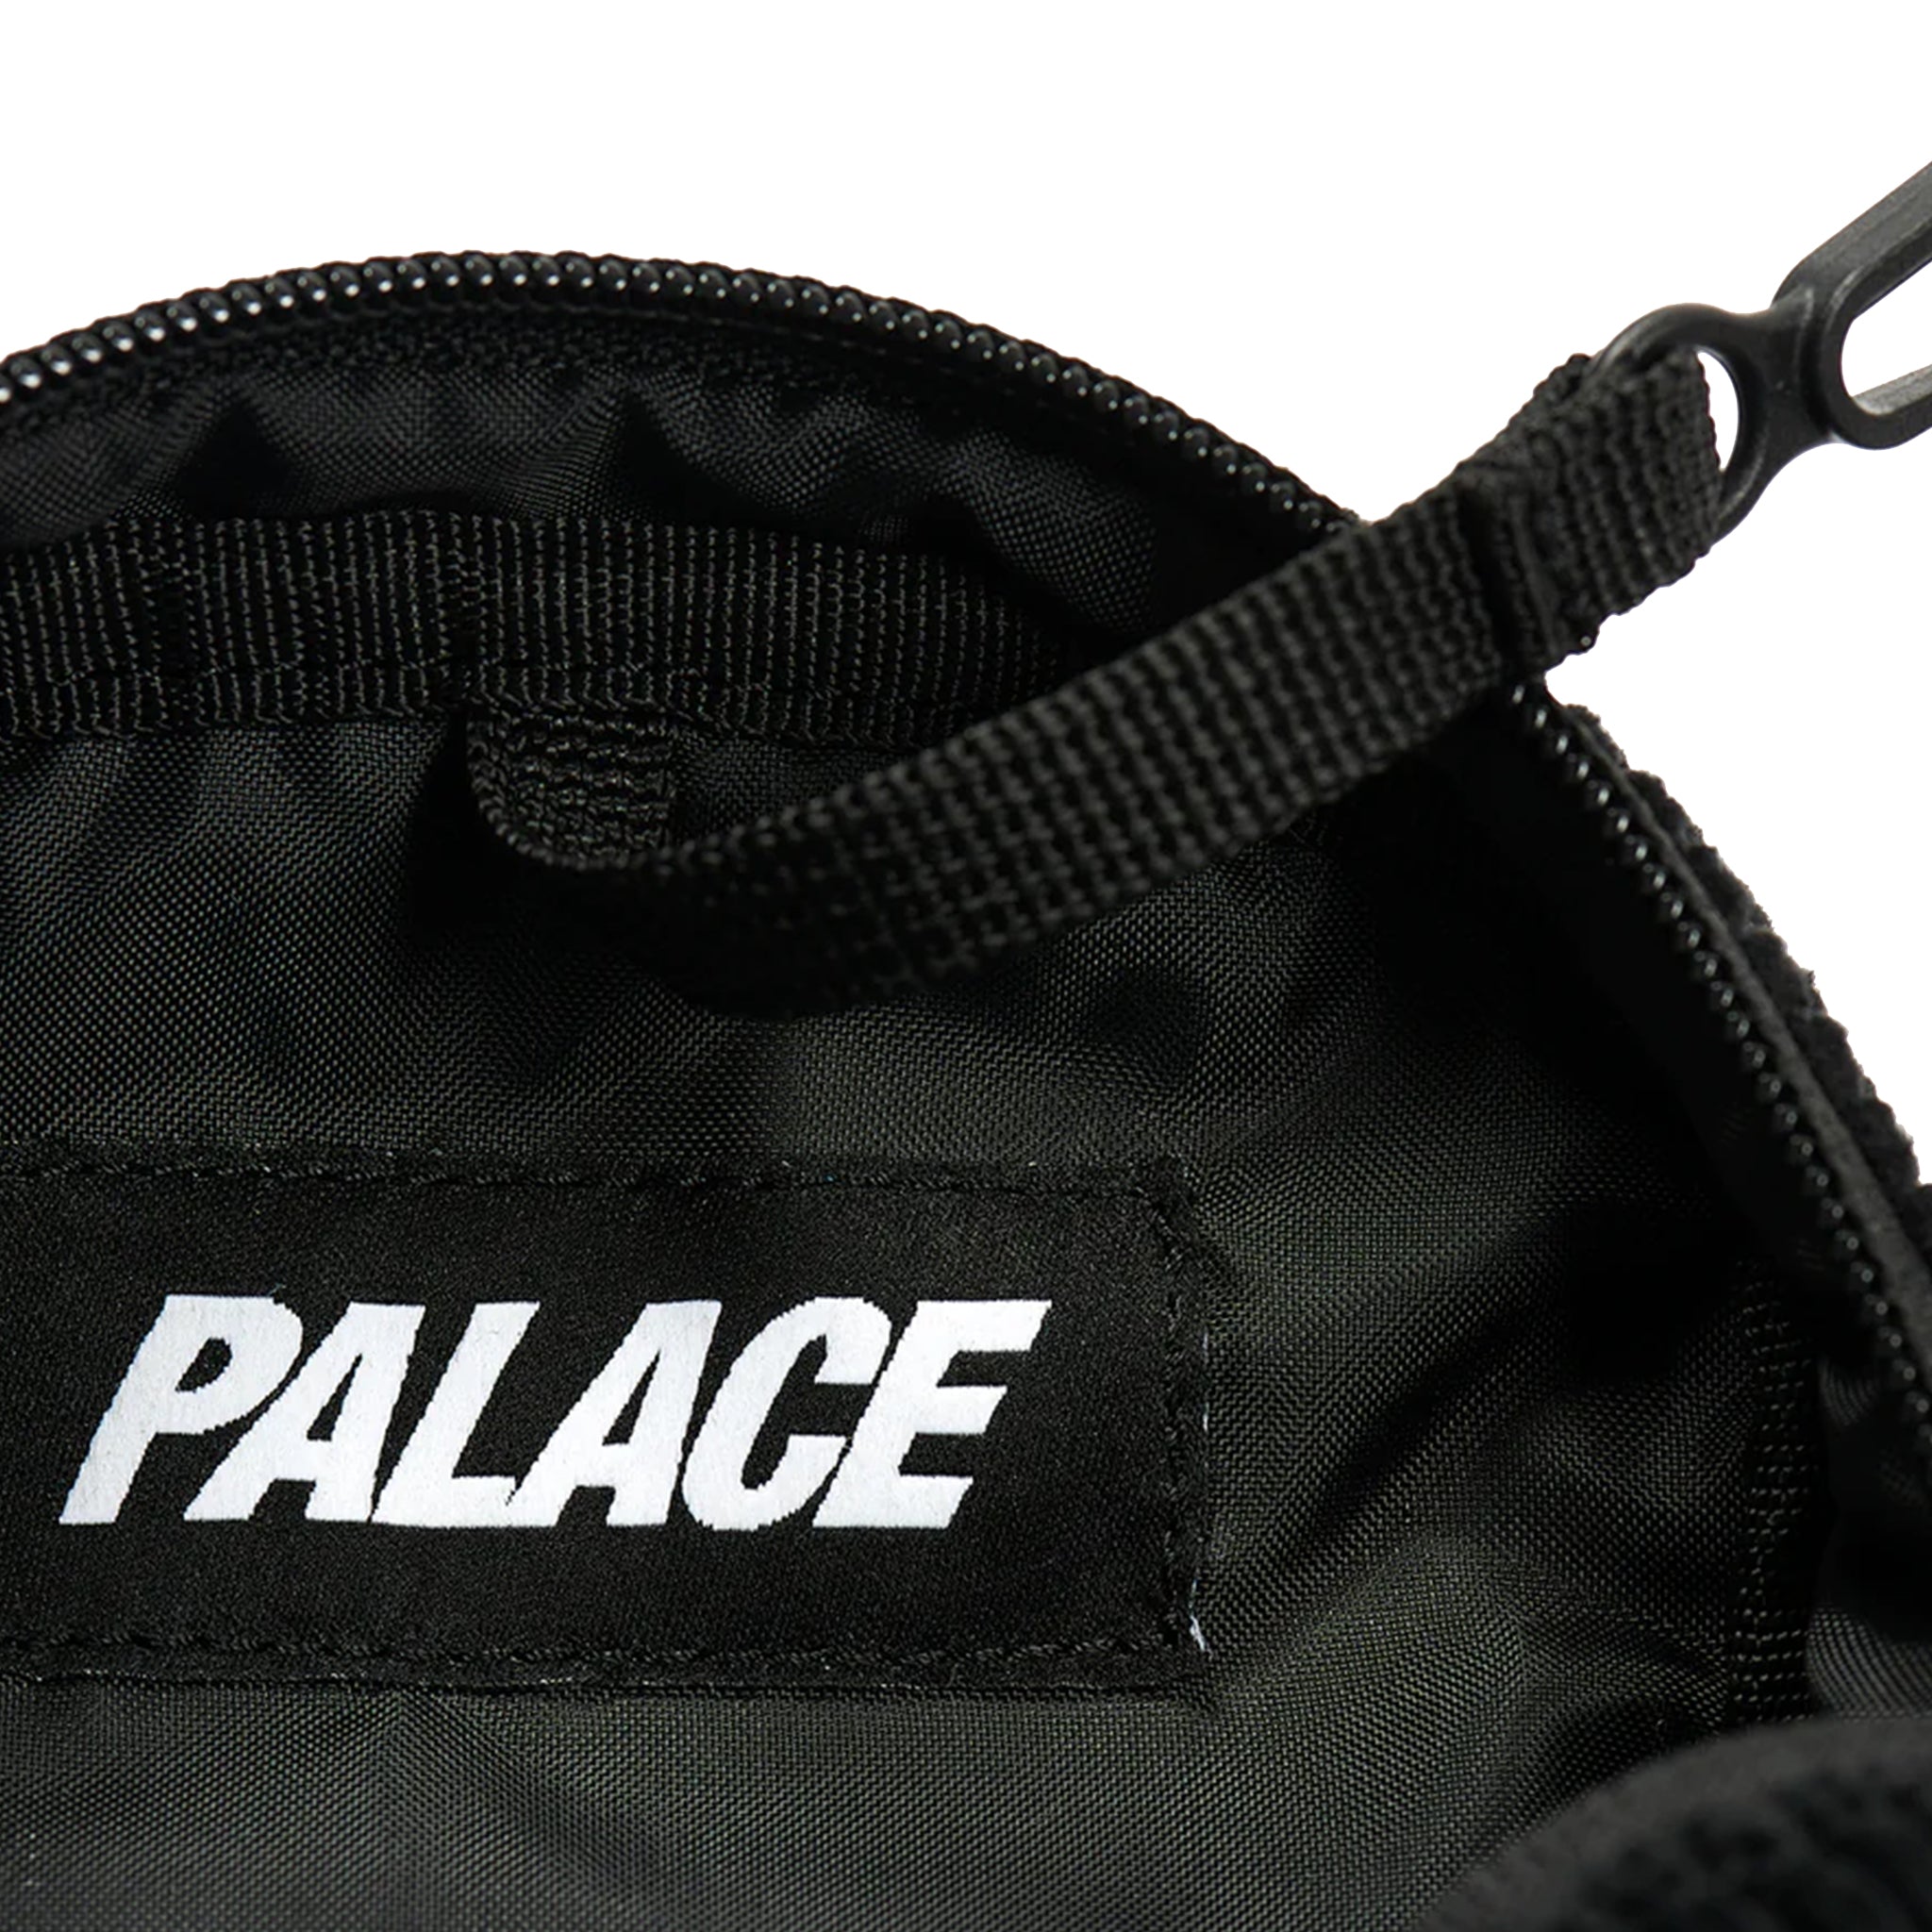 Palace Bags for Men - Shop Now on FARFETCH